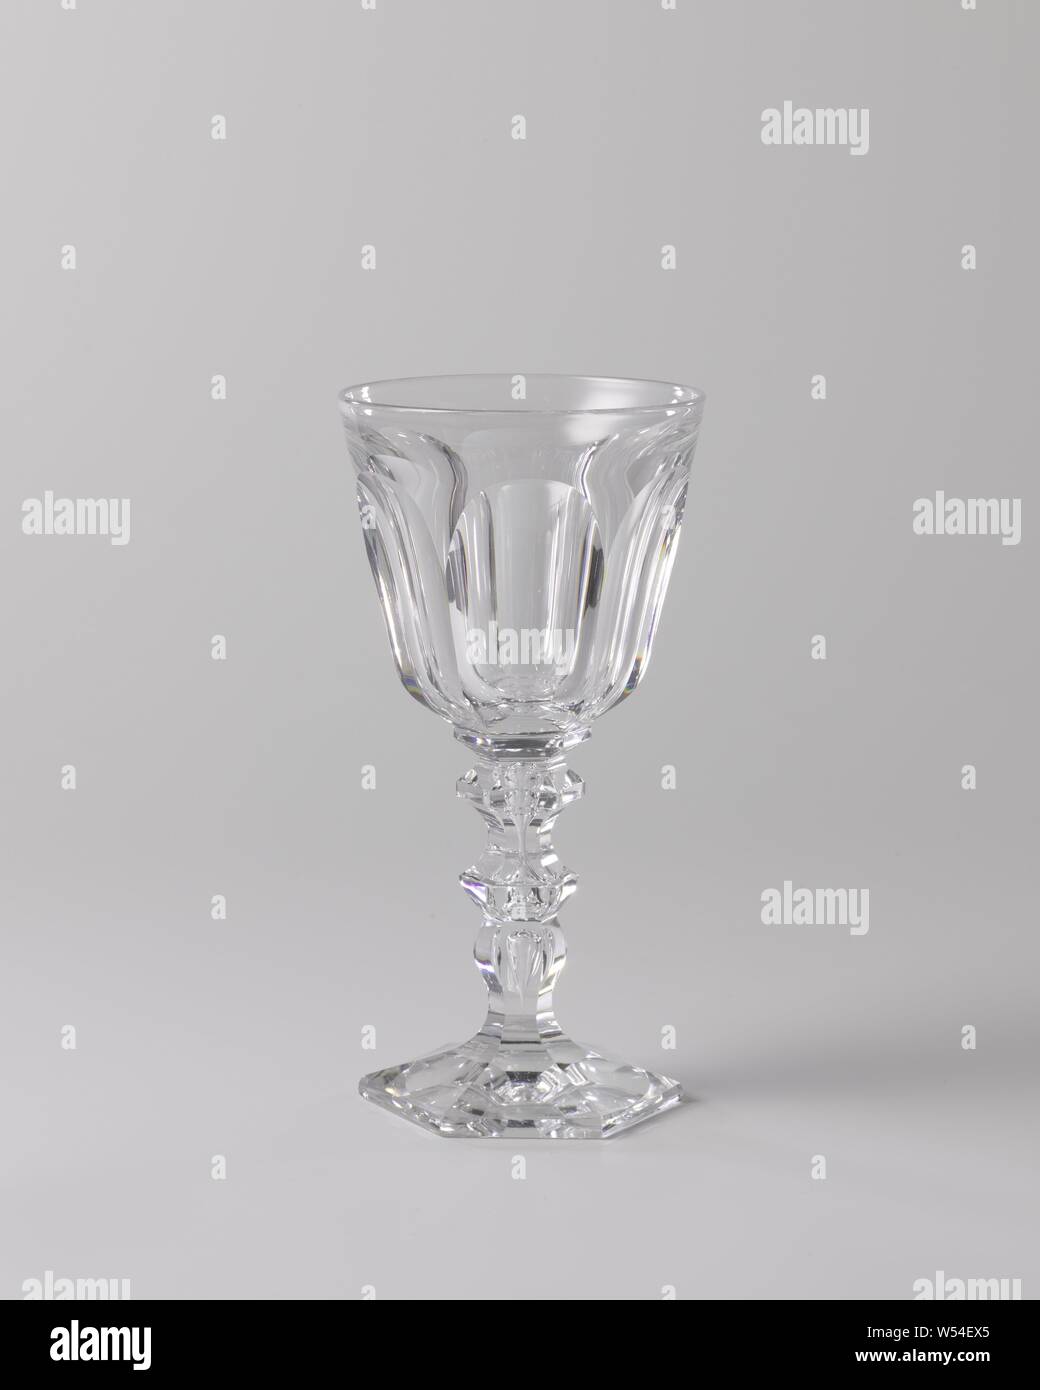 Goblet with cut elips, Hexagonal, conical foot, baluster-shaped trunk with an enclosed bubble and two knots. Conical chalice rounded at the bottom. Faceted cut base and stem, chalice cut into ellipses., anonymous, France, c. 1850 - c. 1875, glass, grinding, h 18.1 cm × d 9.2 cm Stock Photo